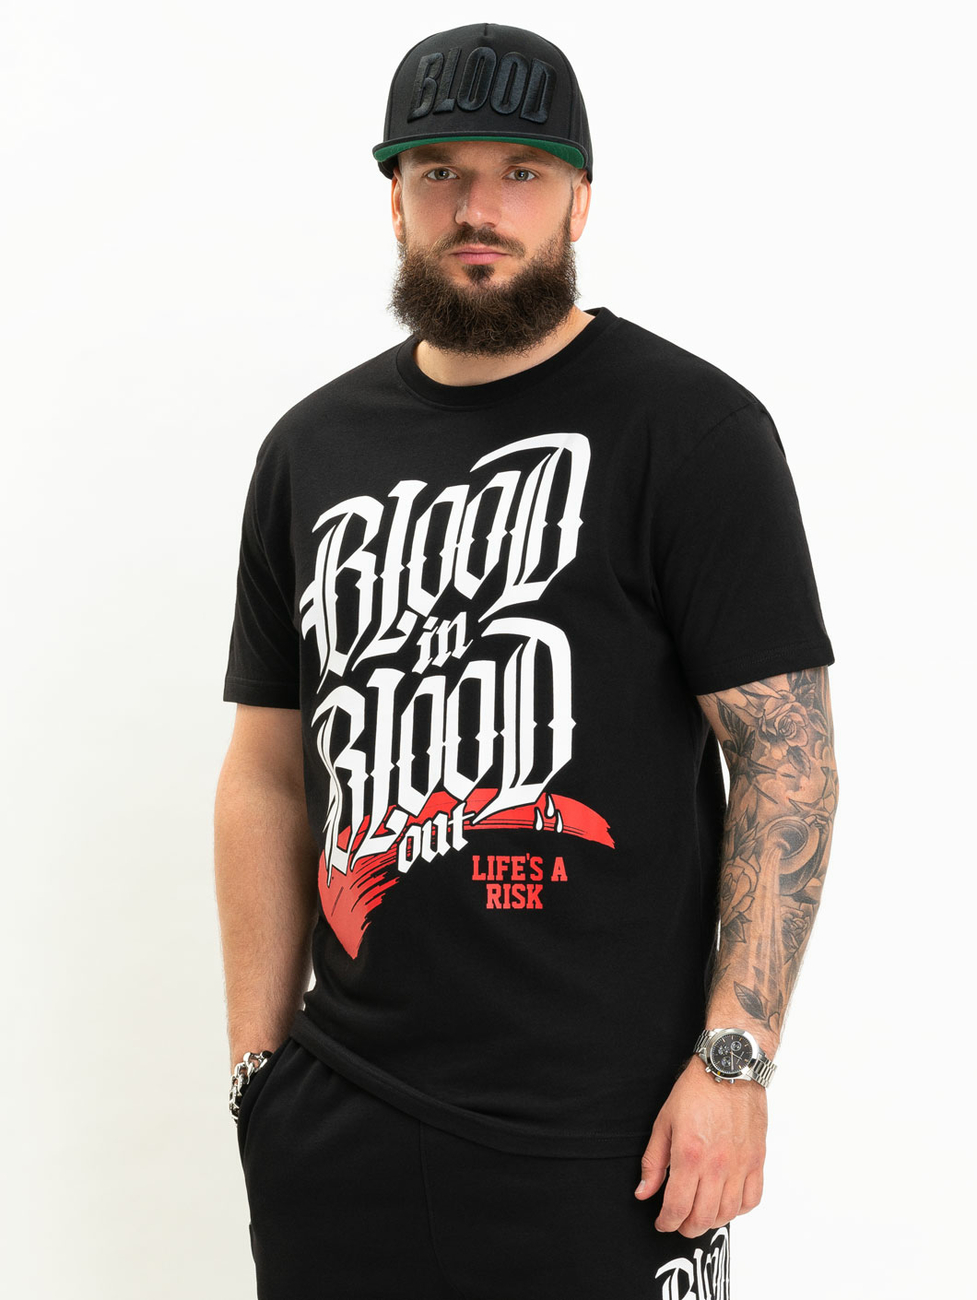 Blood In Blood Out Tranjeros T-Shirt S